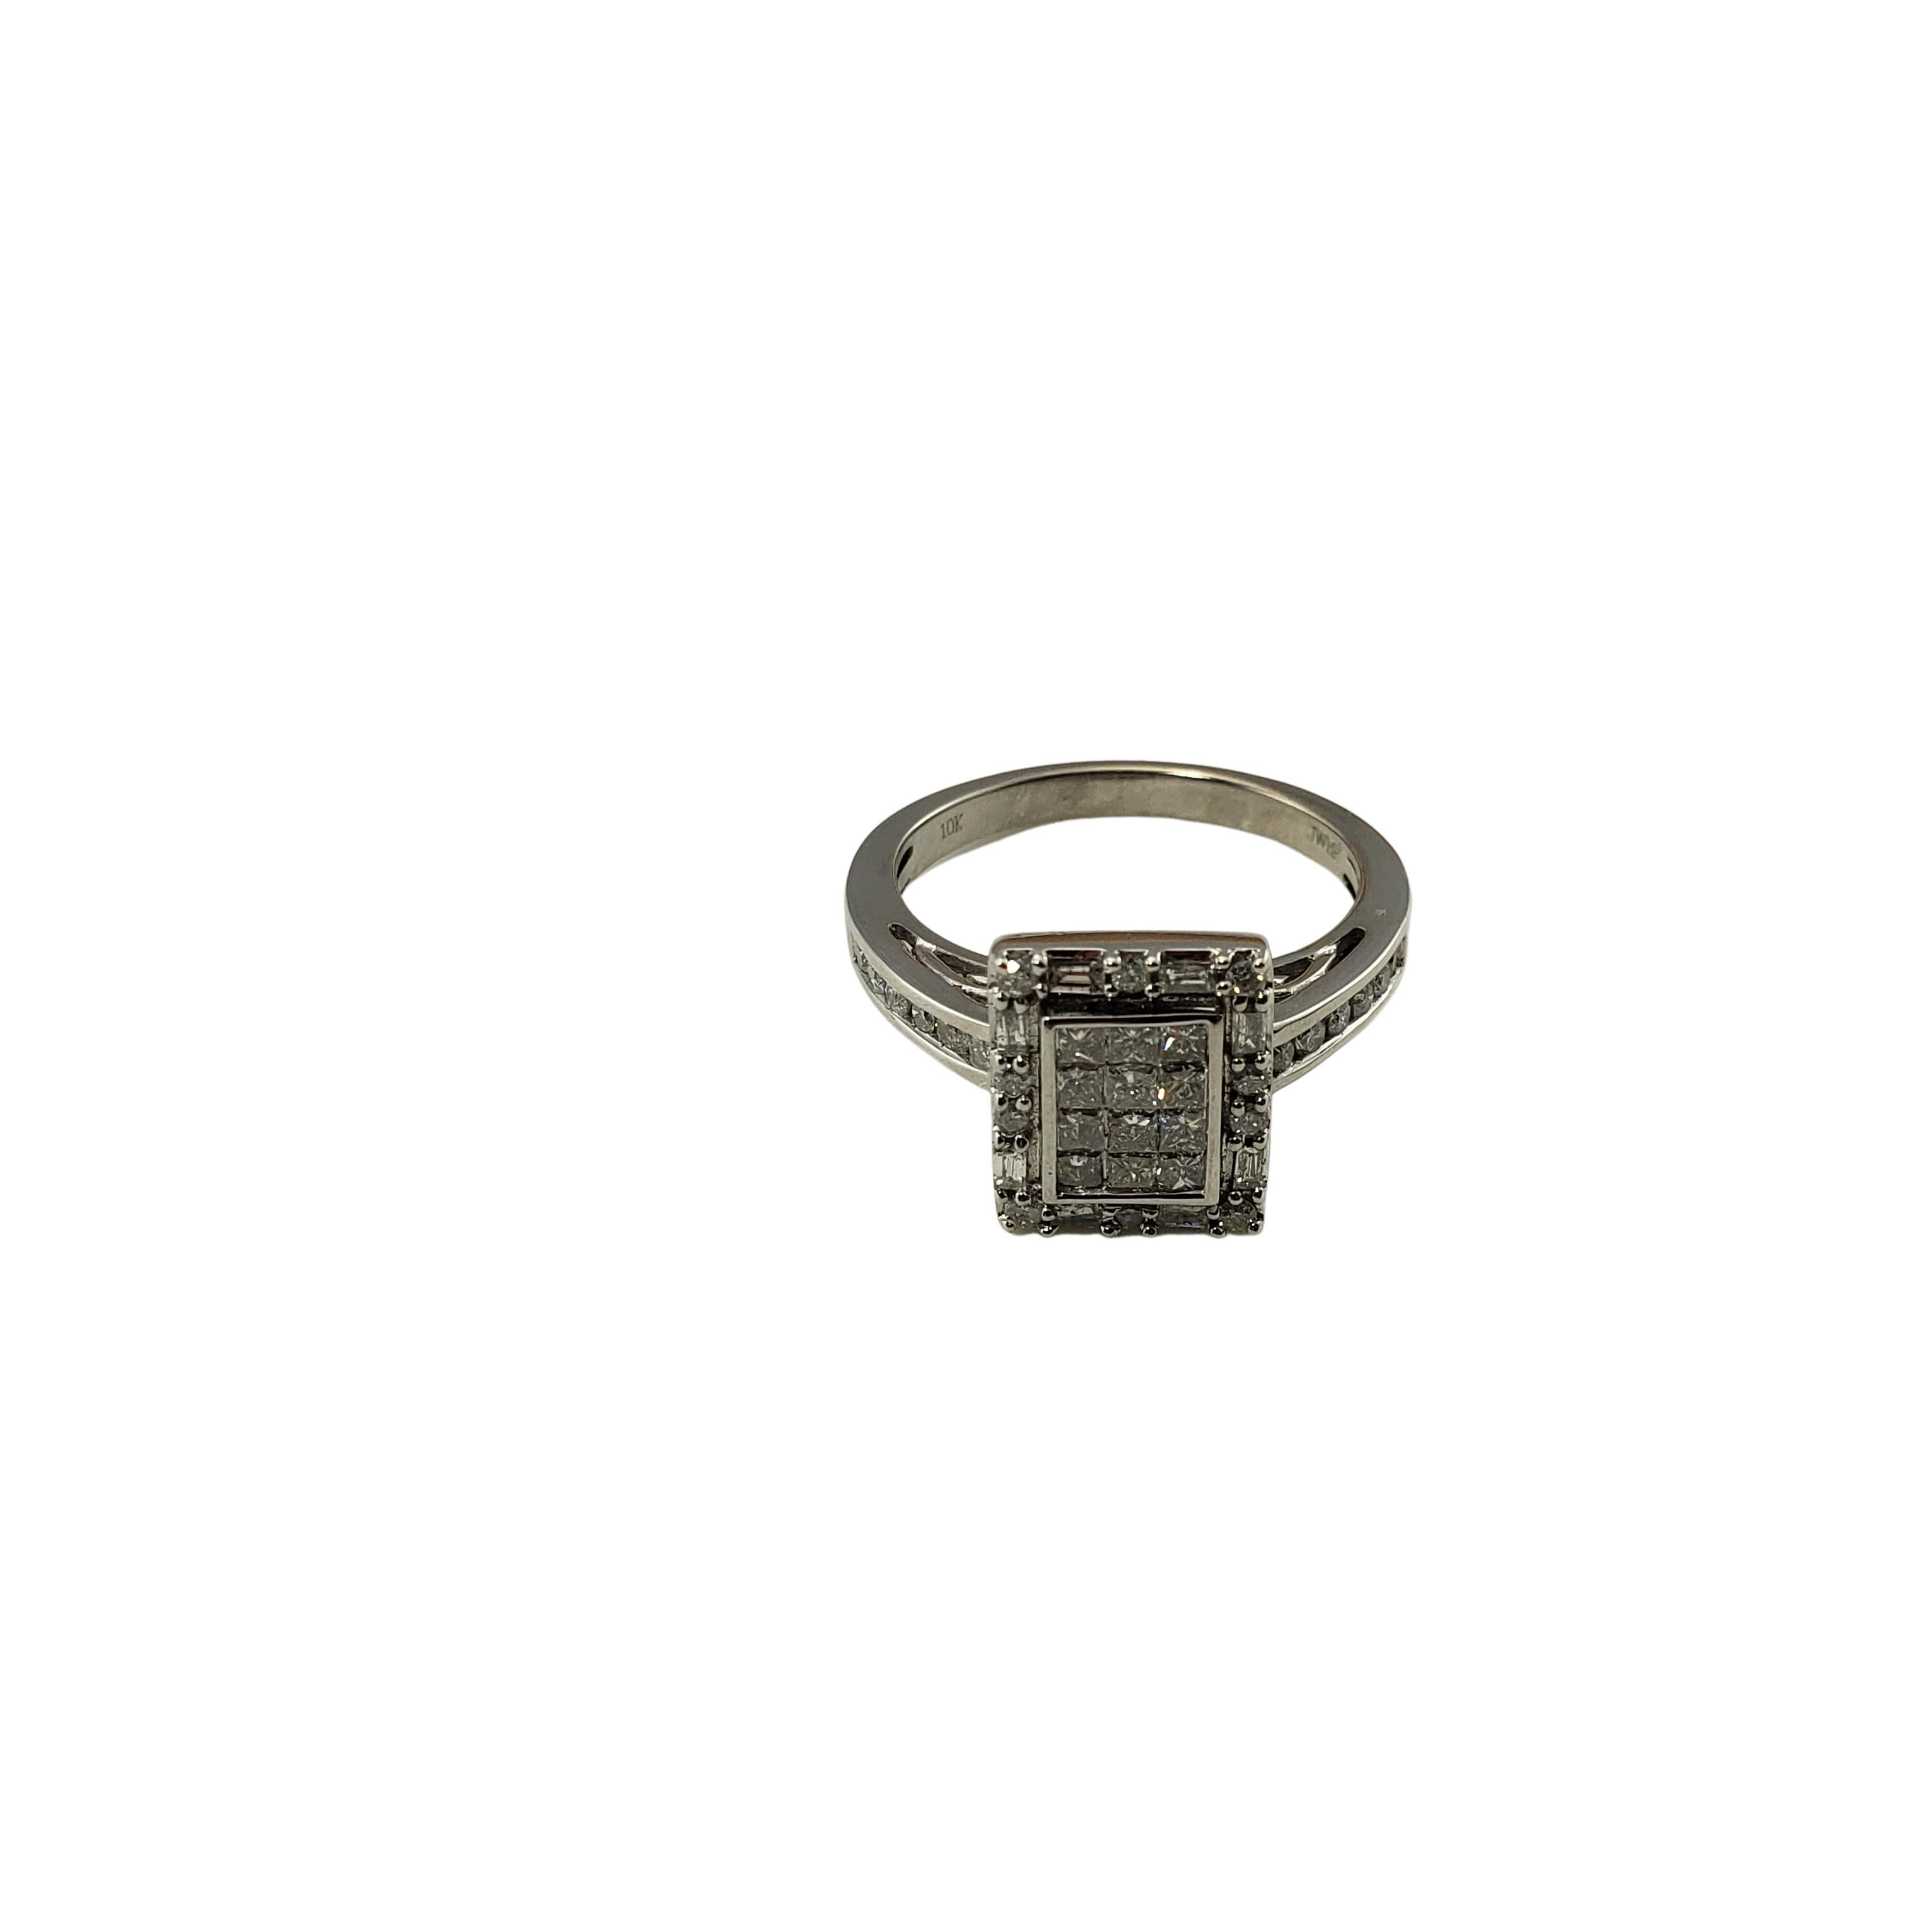 Vintage 10 Karat White Gold and Diamond Ring Size 7-

This sparkling ring features 12 princess cut diamonds, 18 round brilliant cut diamonds and eight baguette diamonds set in classic 10K white gold.  Top of ring measures 11 mm x 9 mm.  Shank:  2